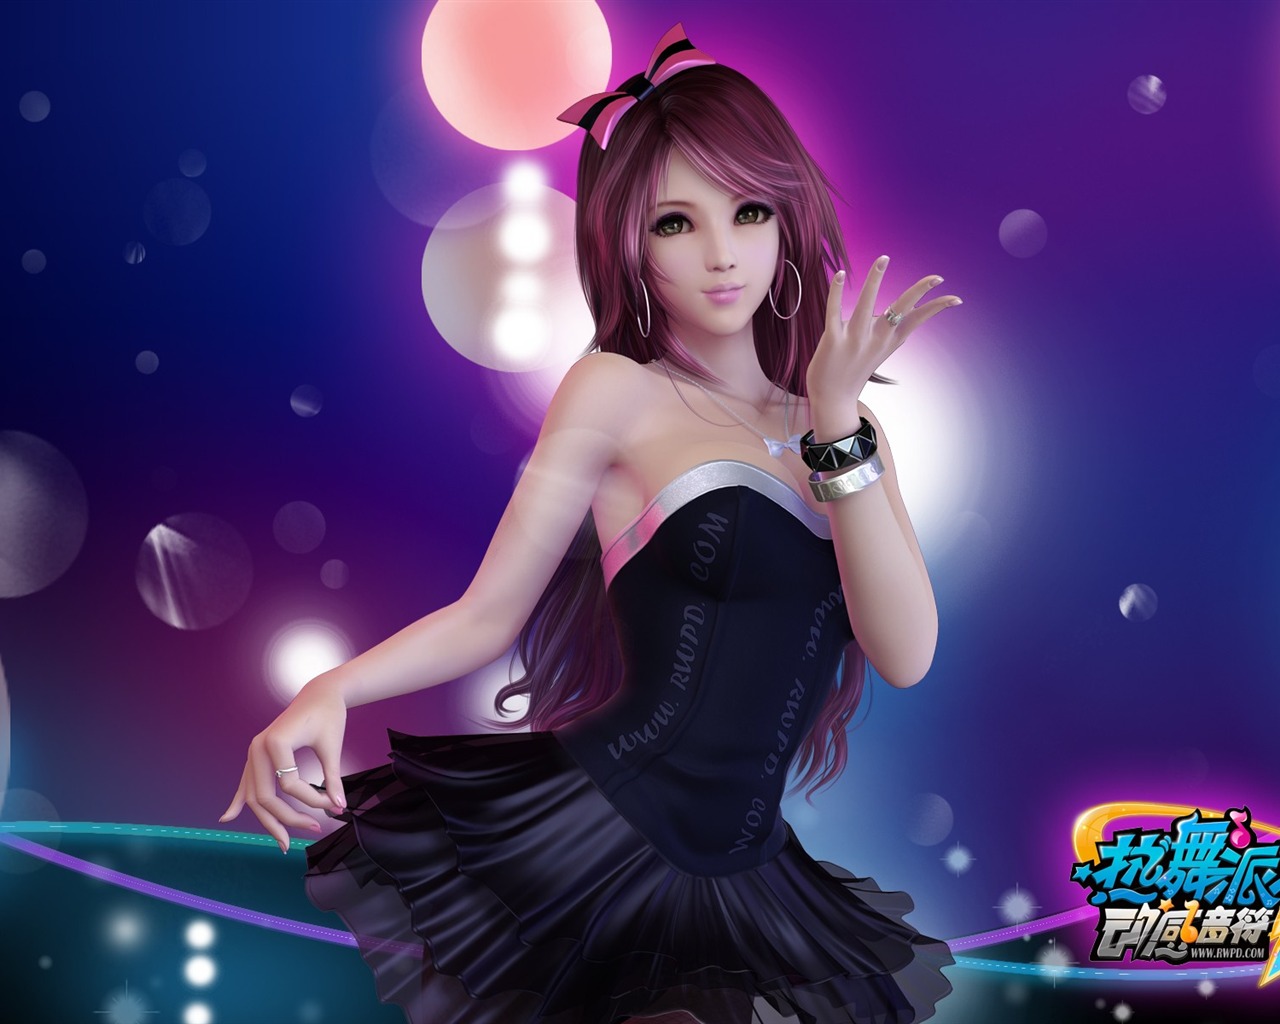 Online game Hot Dance Party II official wallpapers #32 - 1280x1024